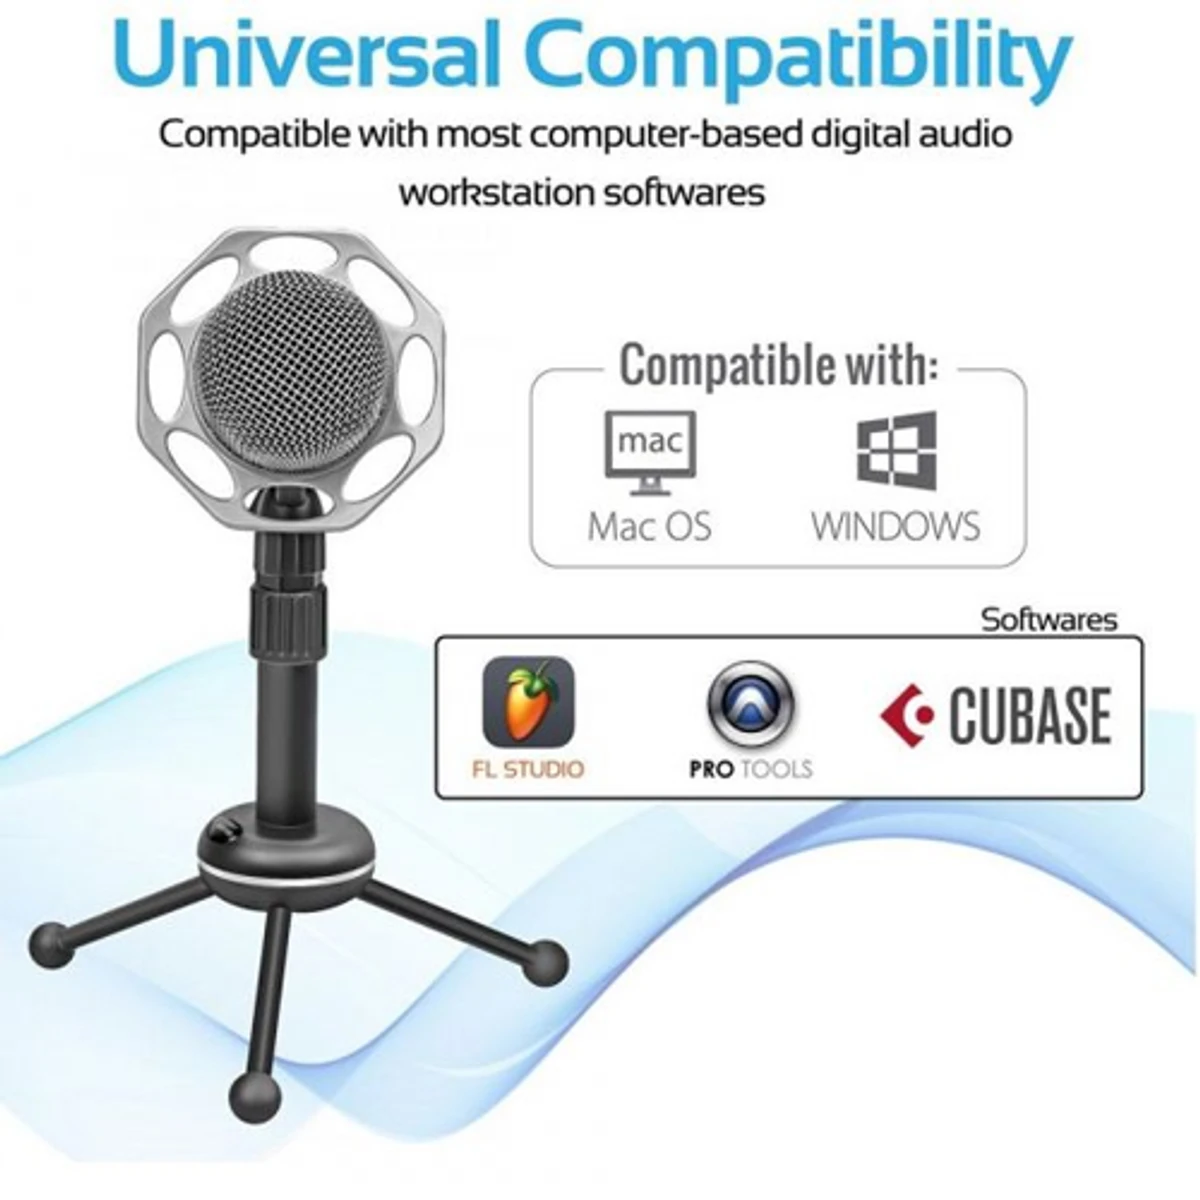 Best Quality Desk Microphones- Professional Condenser Recording Podcast Microphone By Promate